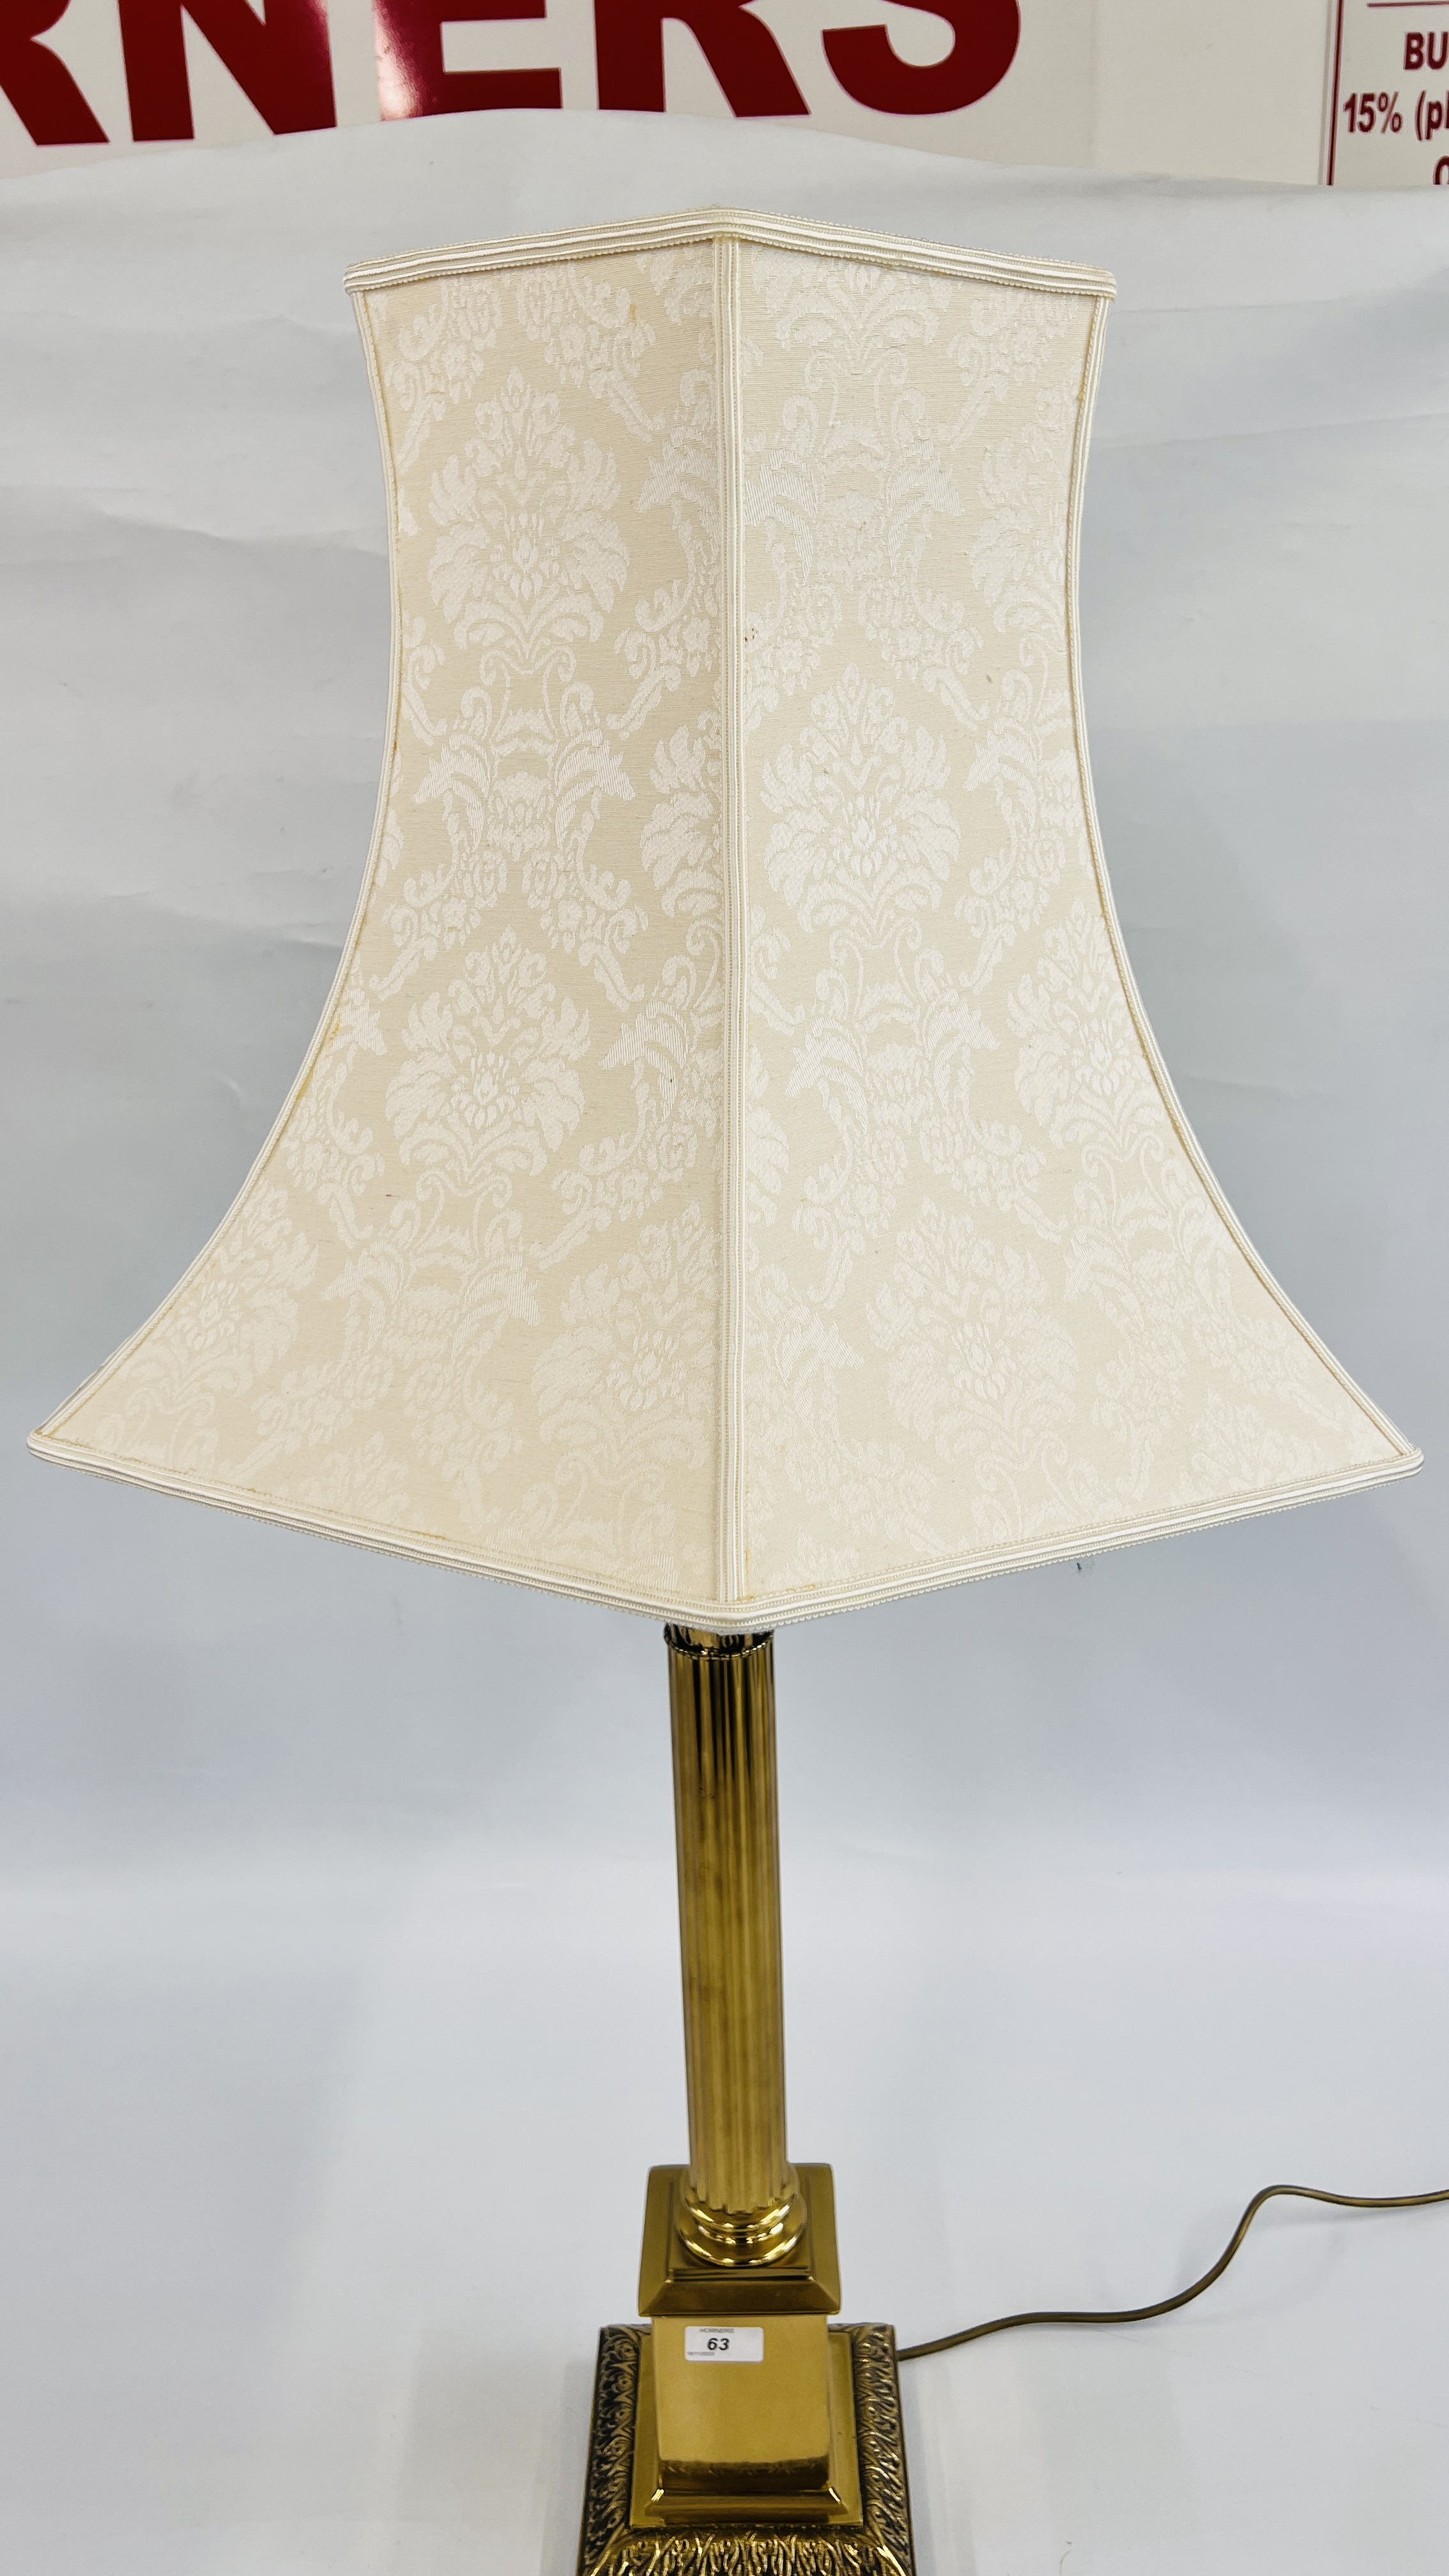 AN IMPRESSIVE HEAVY BRASS CORINTHIAN COLUMN DESIGN TABLE LAMP WITH CREAM PATTERNED SHADE - HEIGHT - Image 3 of 4